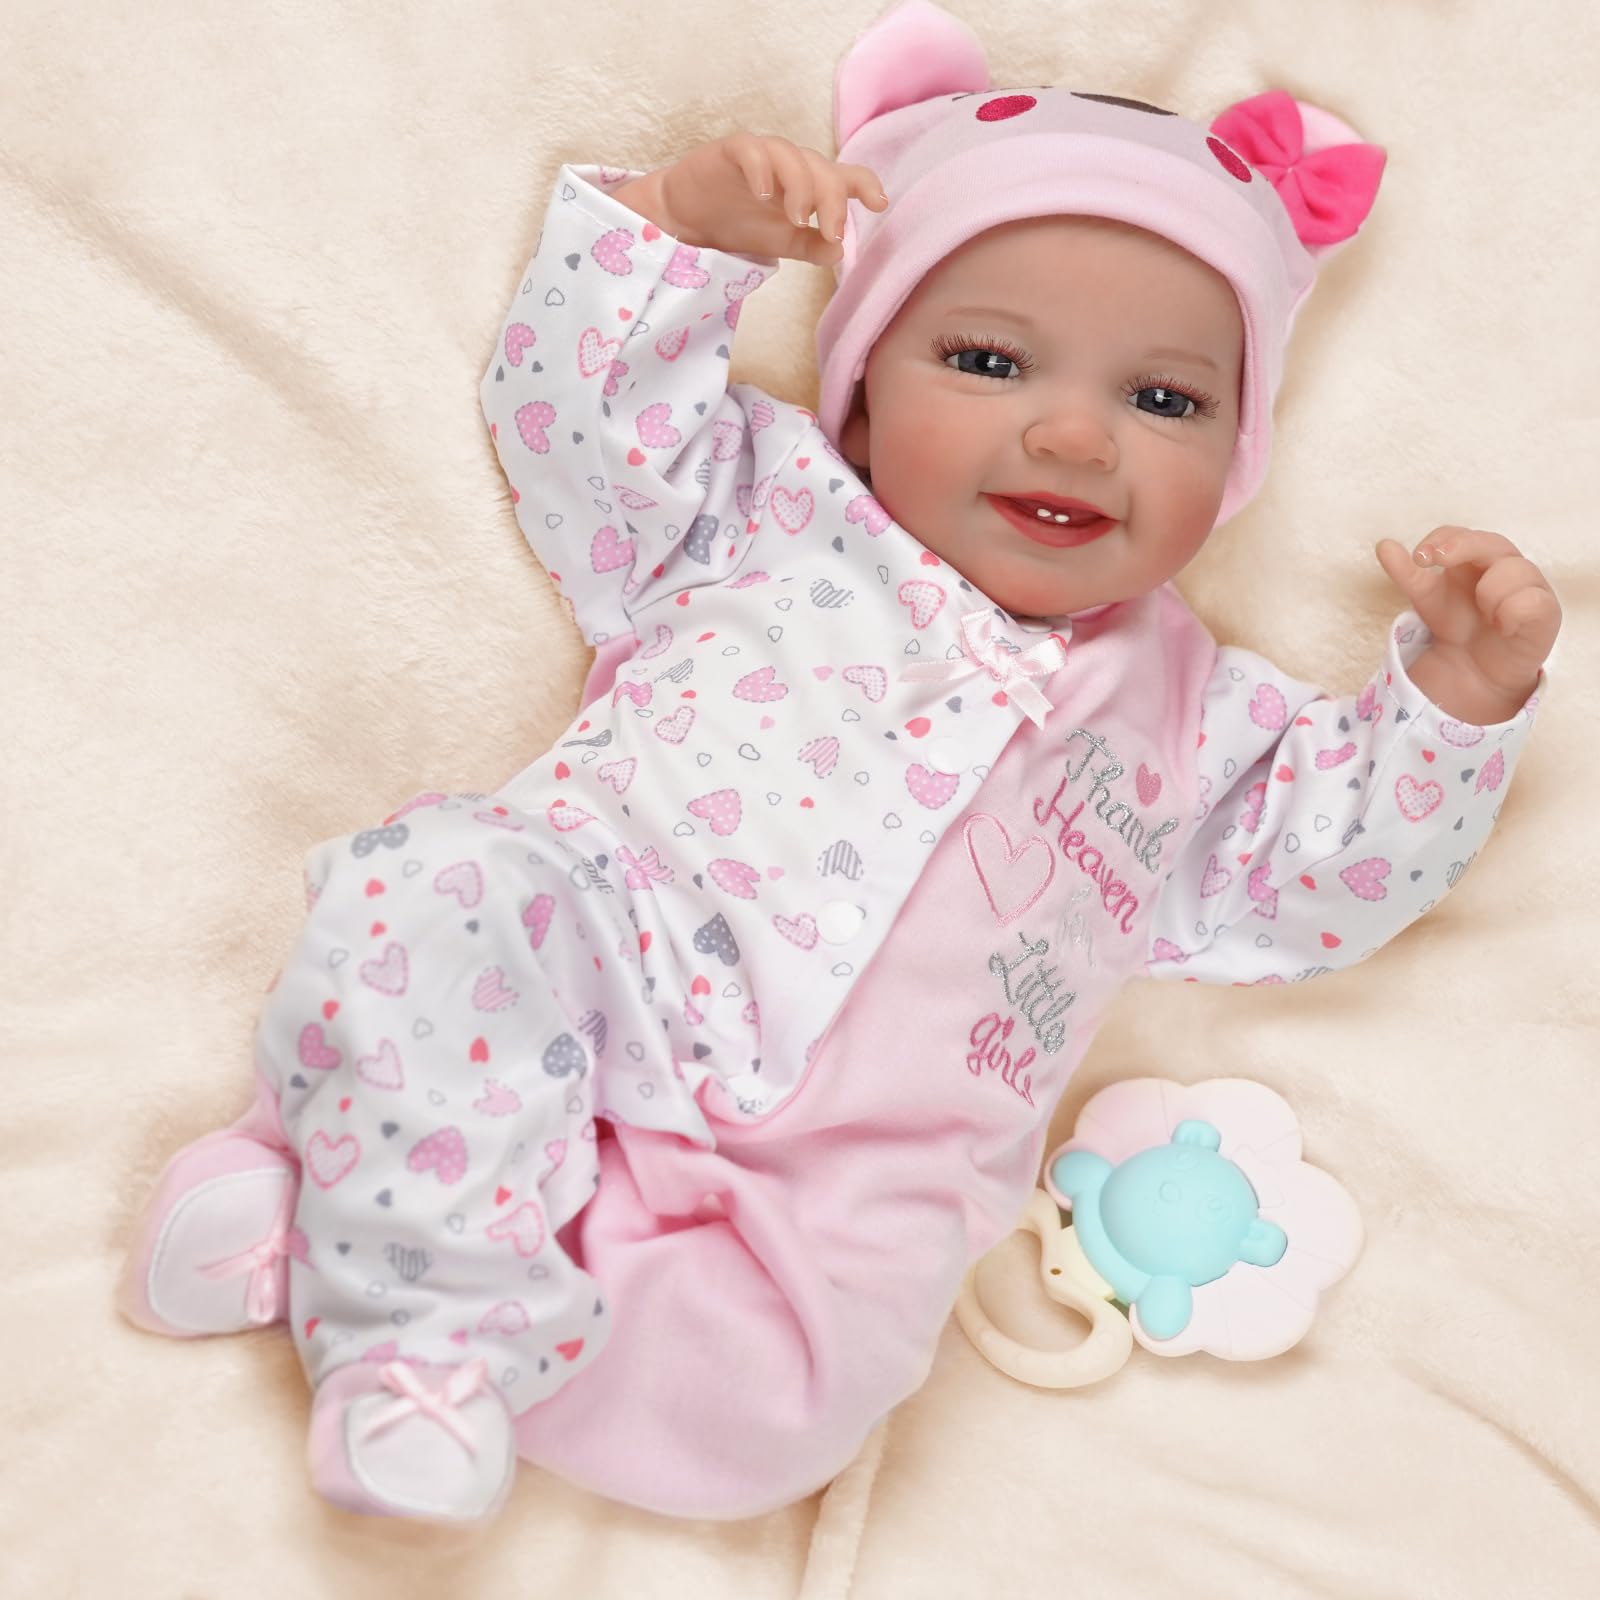 BABESIDE Lifelike Reborn Baby Dolls - 20-Inch Lovely Awake Realistic-Newborn Baby Dolls Soft Cloth Body Real Life Baby Dolls Girl with Feeding Kids for Kids Playing Birthday Gifts & Collection